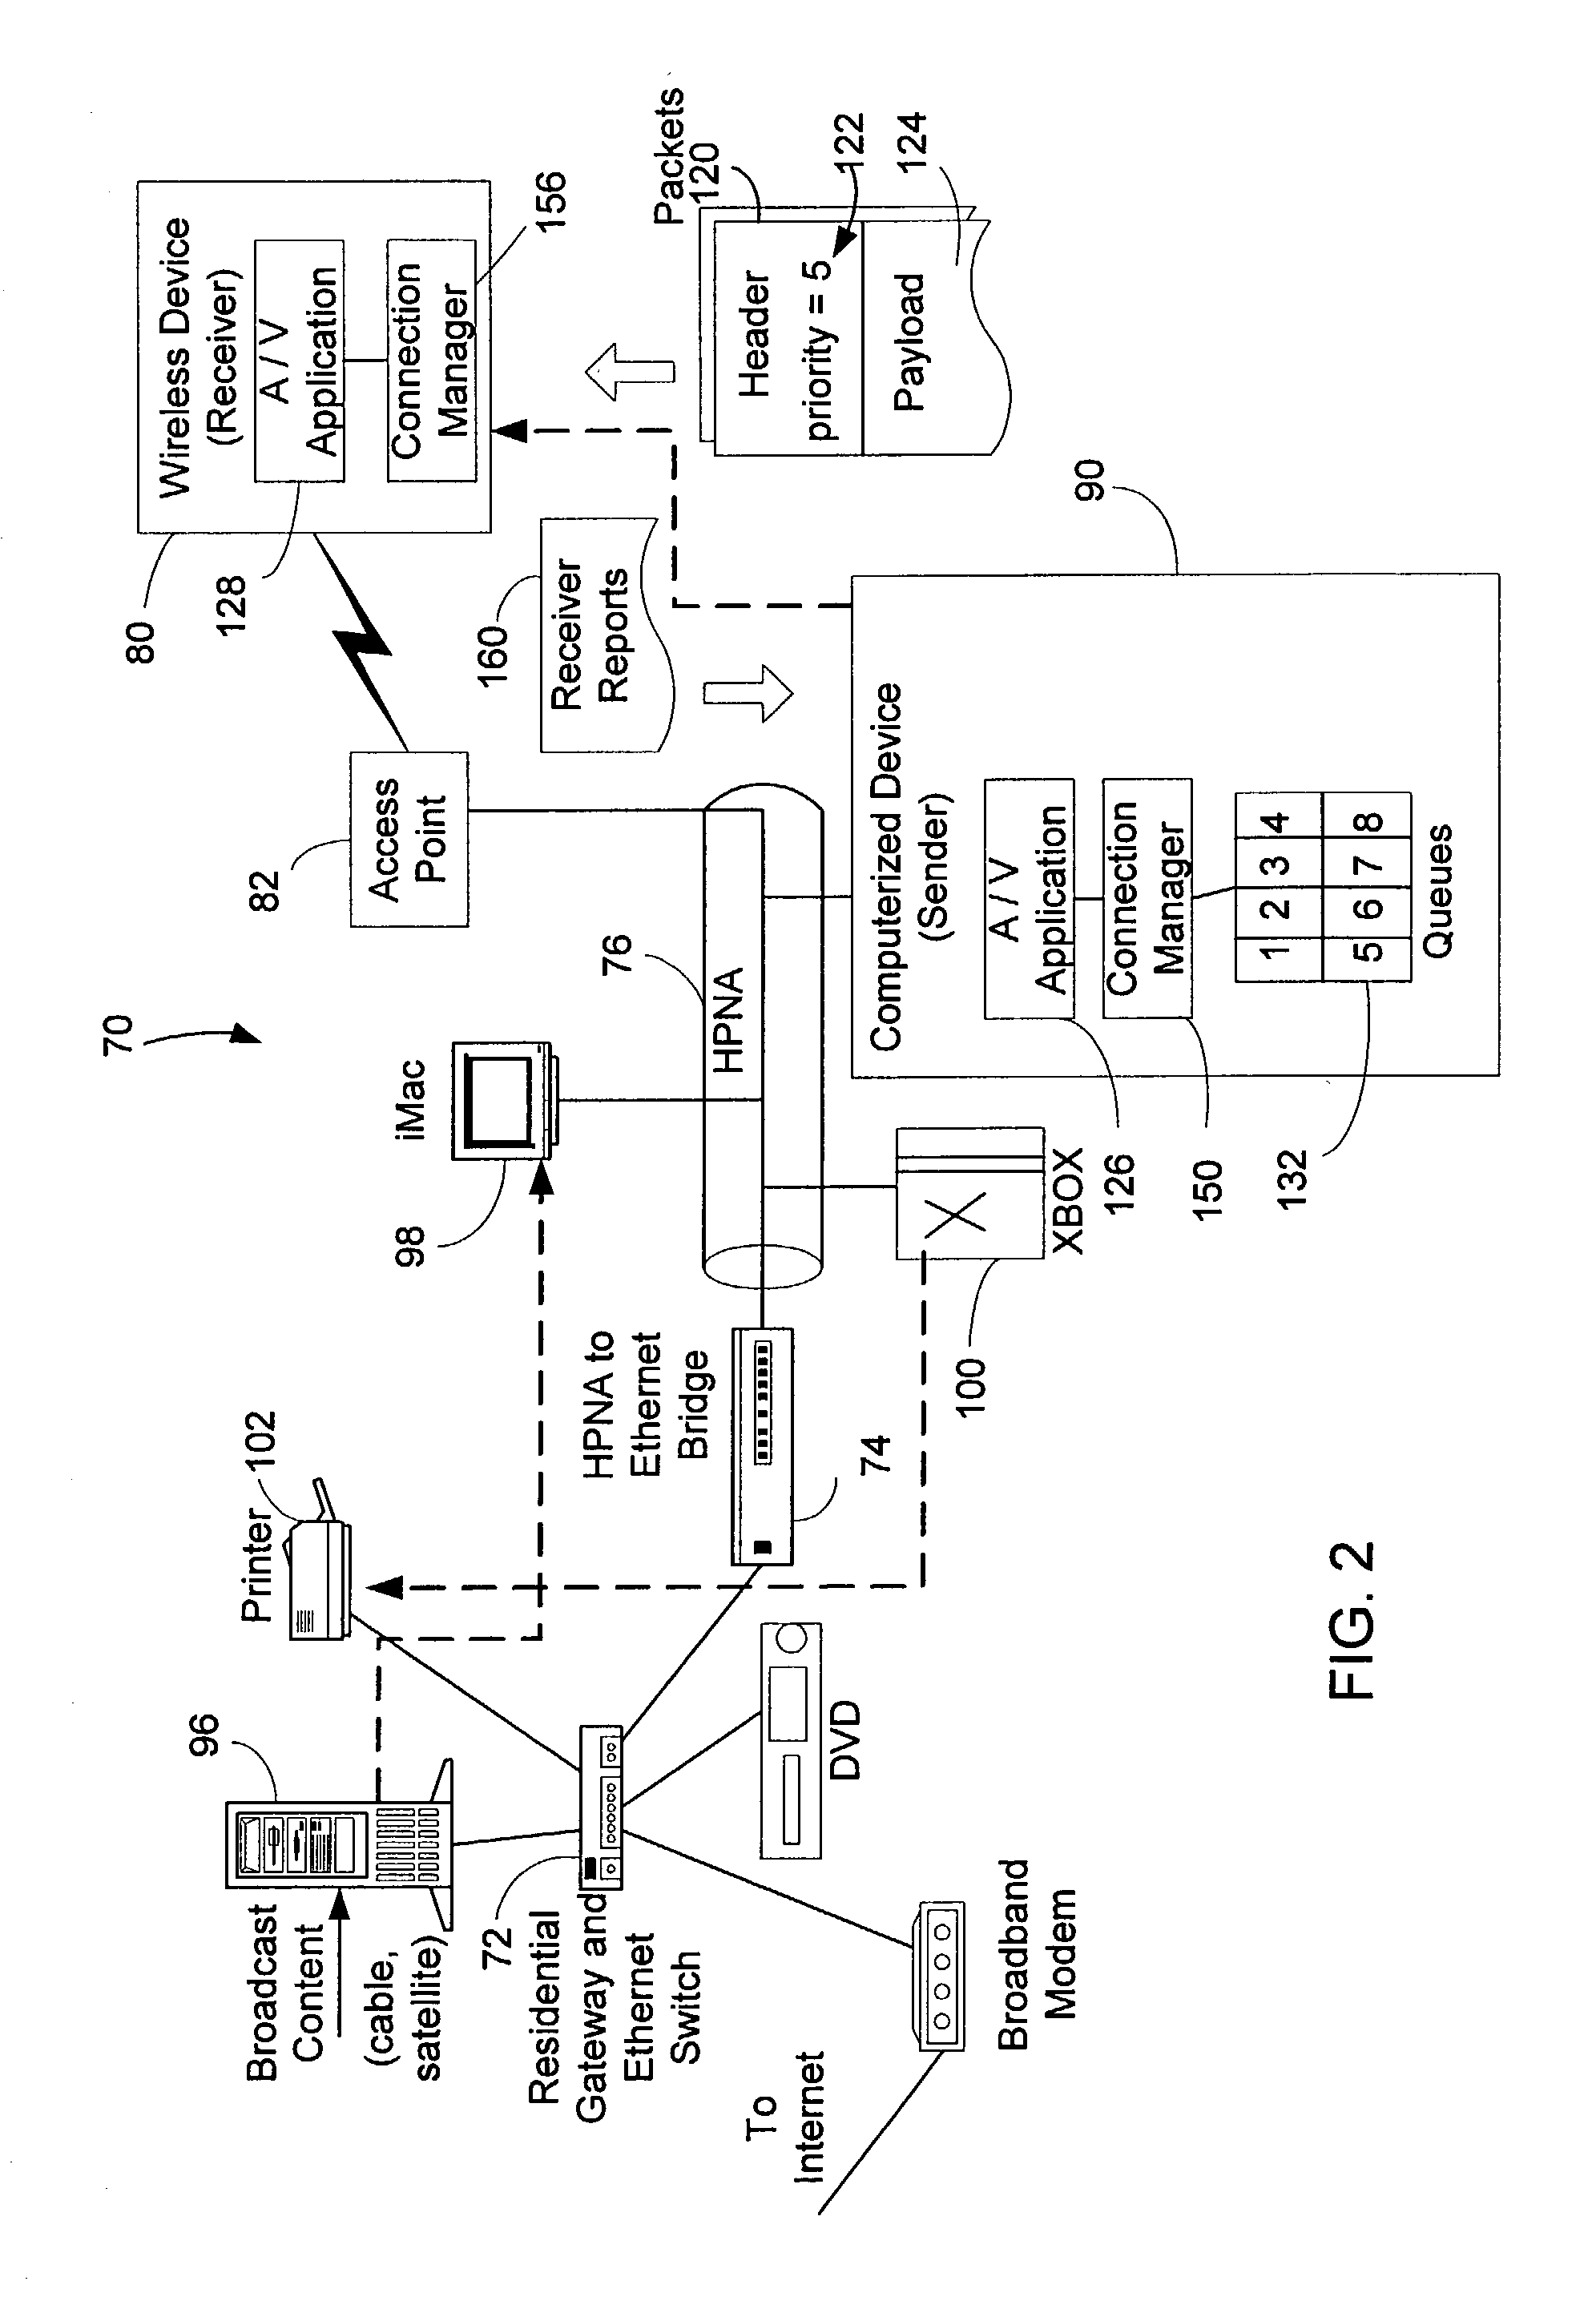 Network connection setup procedure for traffic admission control and implicit network bandwidth reservation